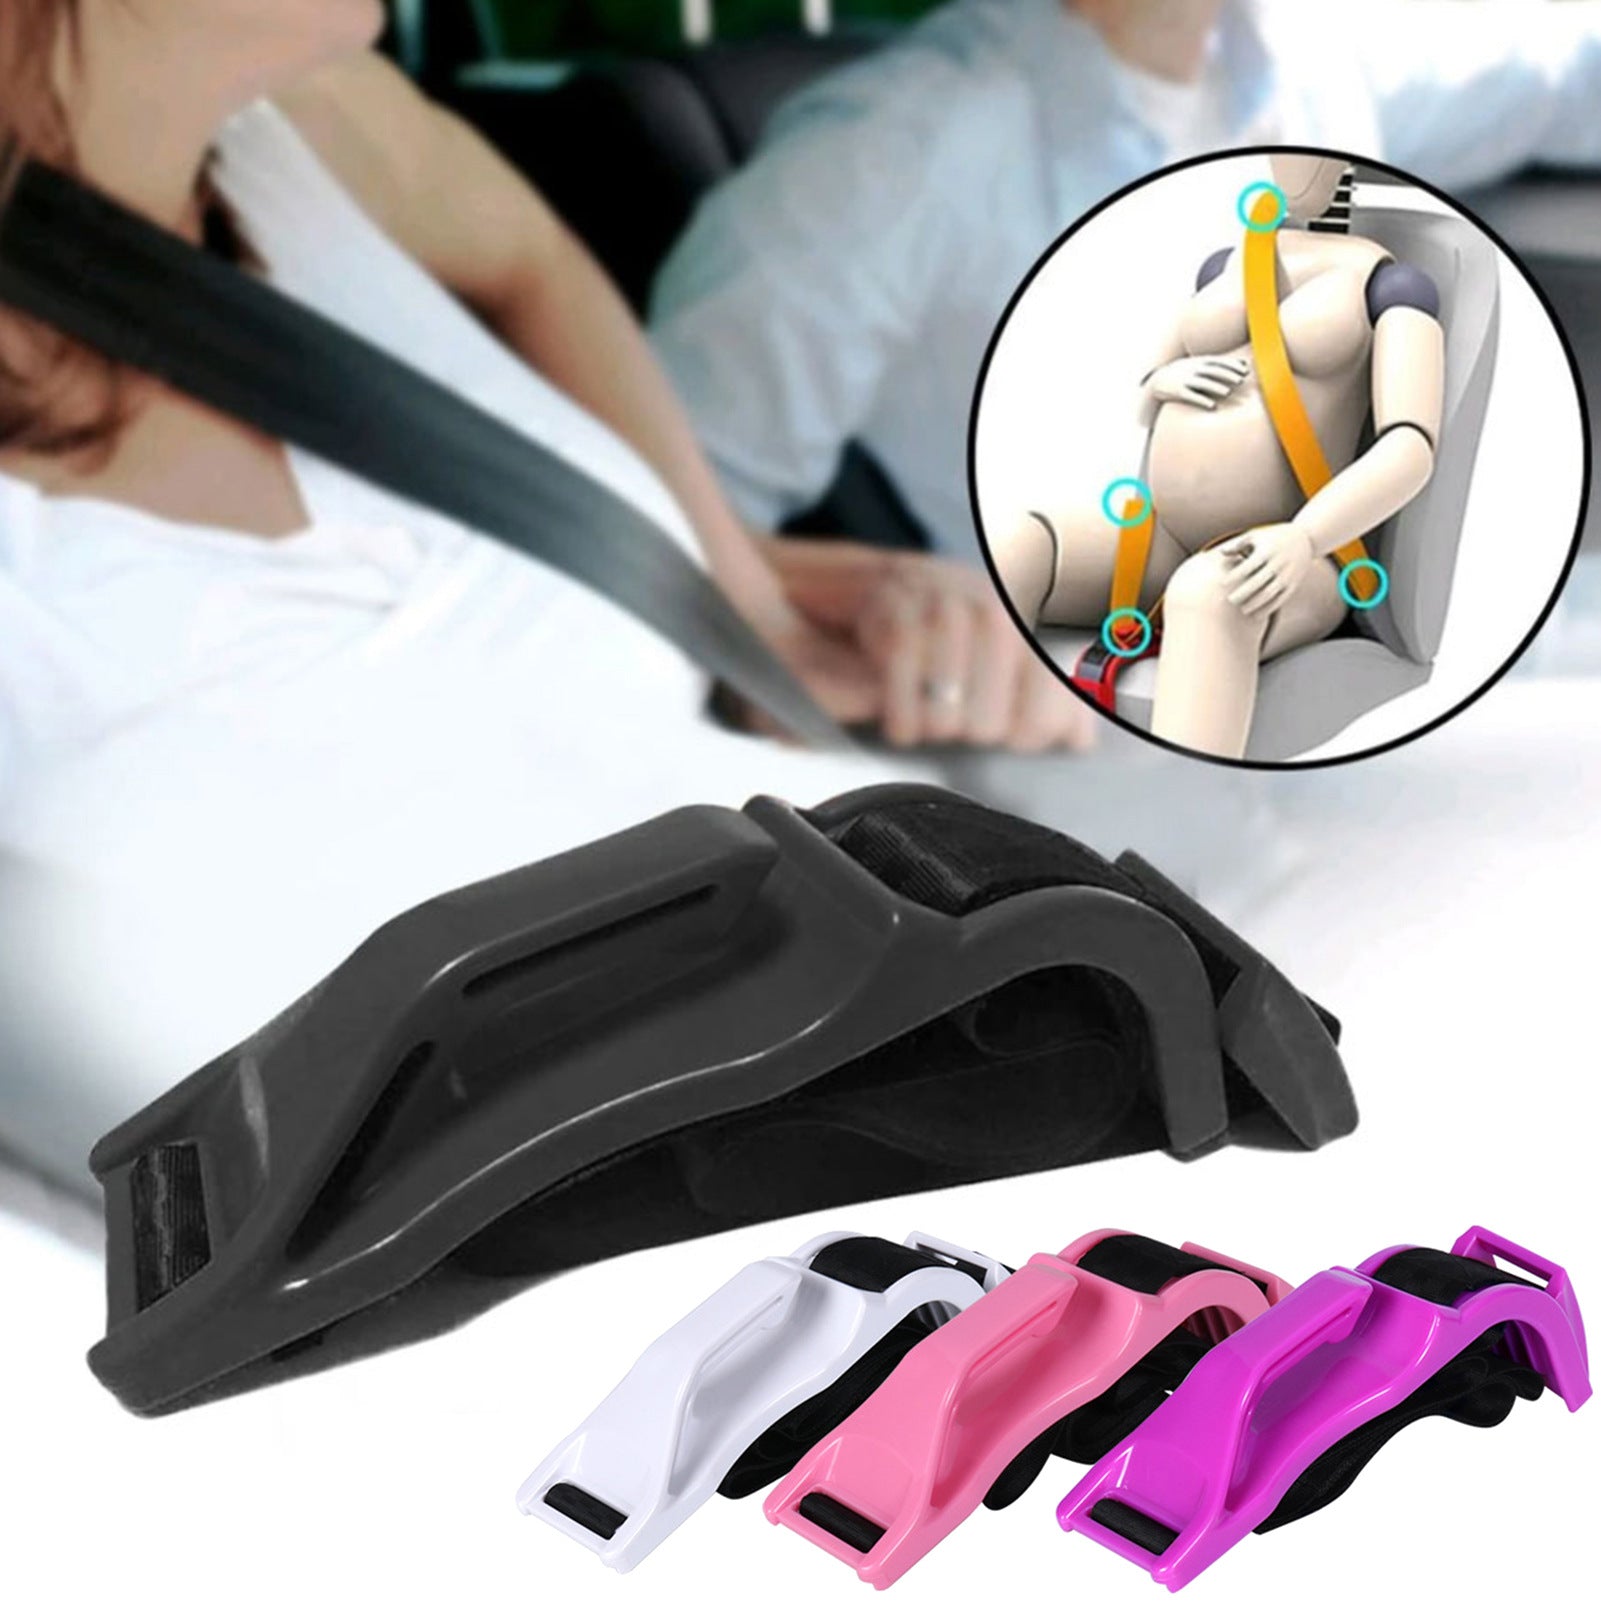 ExpectingSafe™ Maternity Car Seat Belt Adapter - Secure & Comfortable for Moms-to-Be